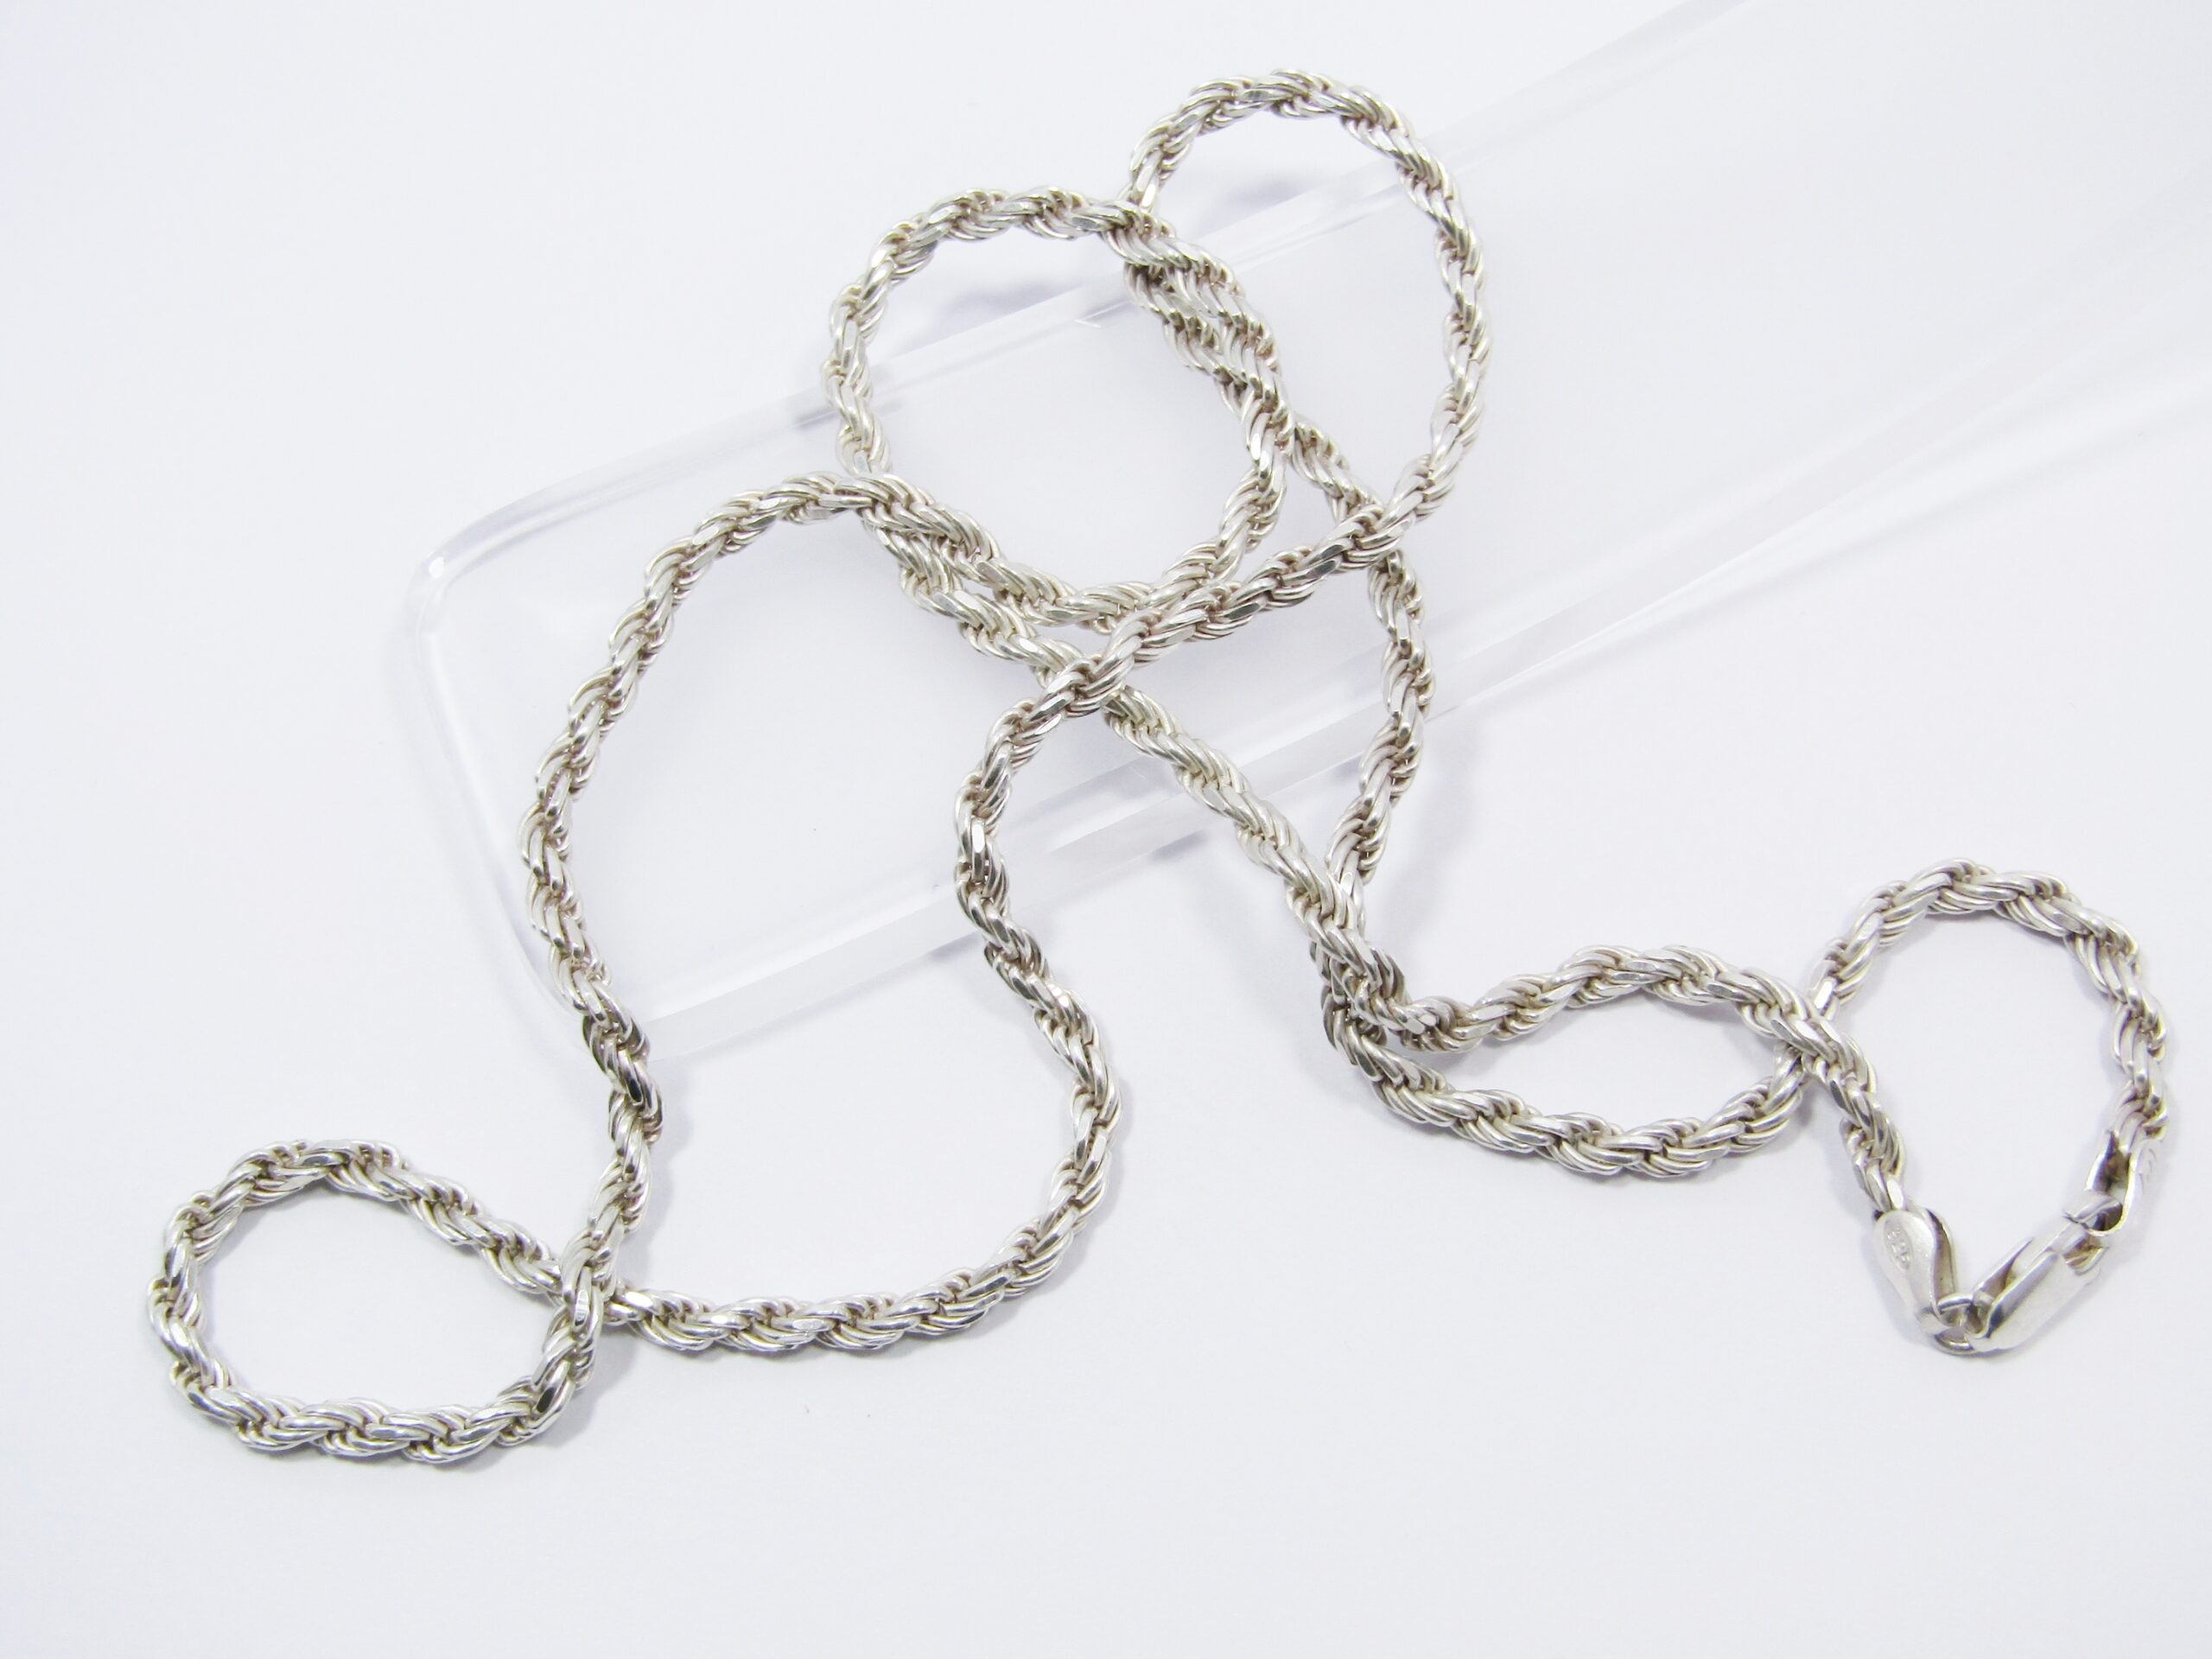  A Lovely Long Rope Design Necklace in Sterling Silver